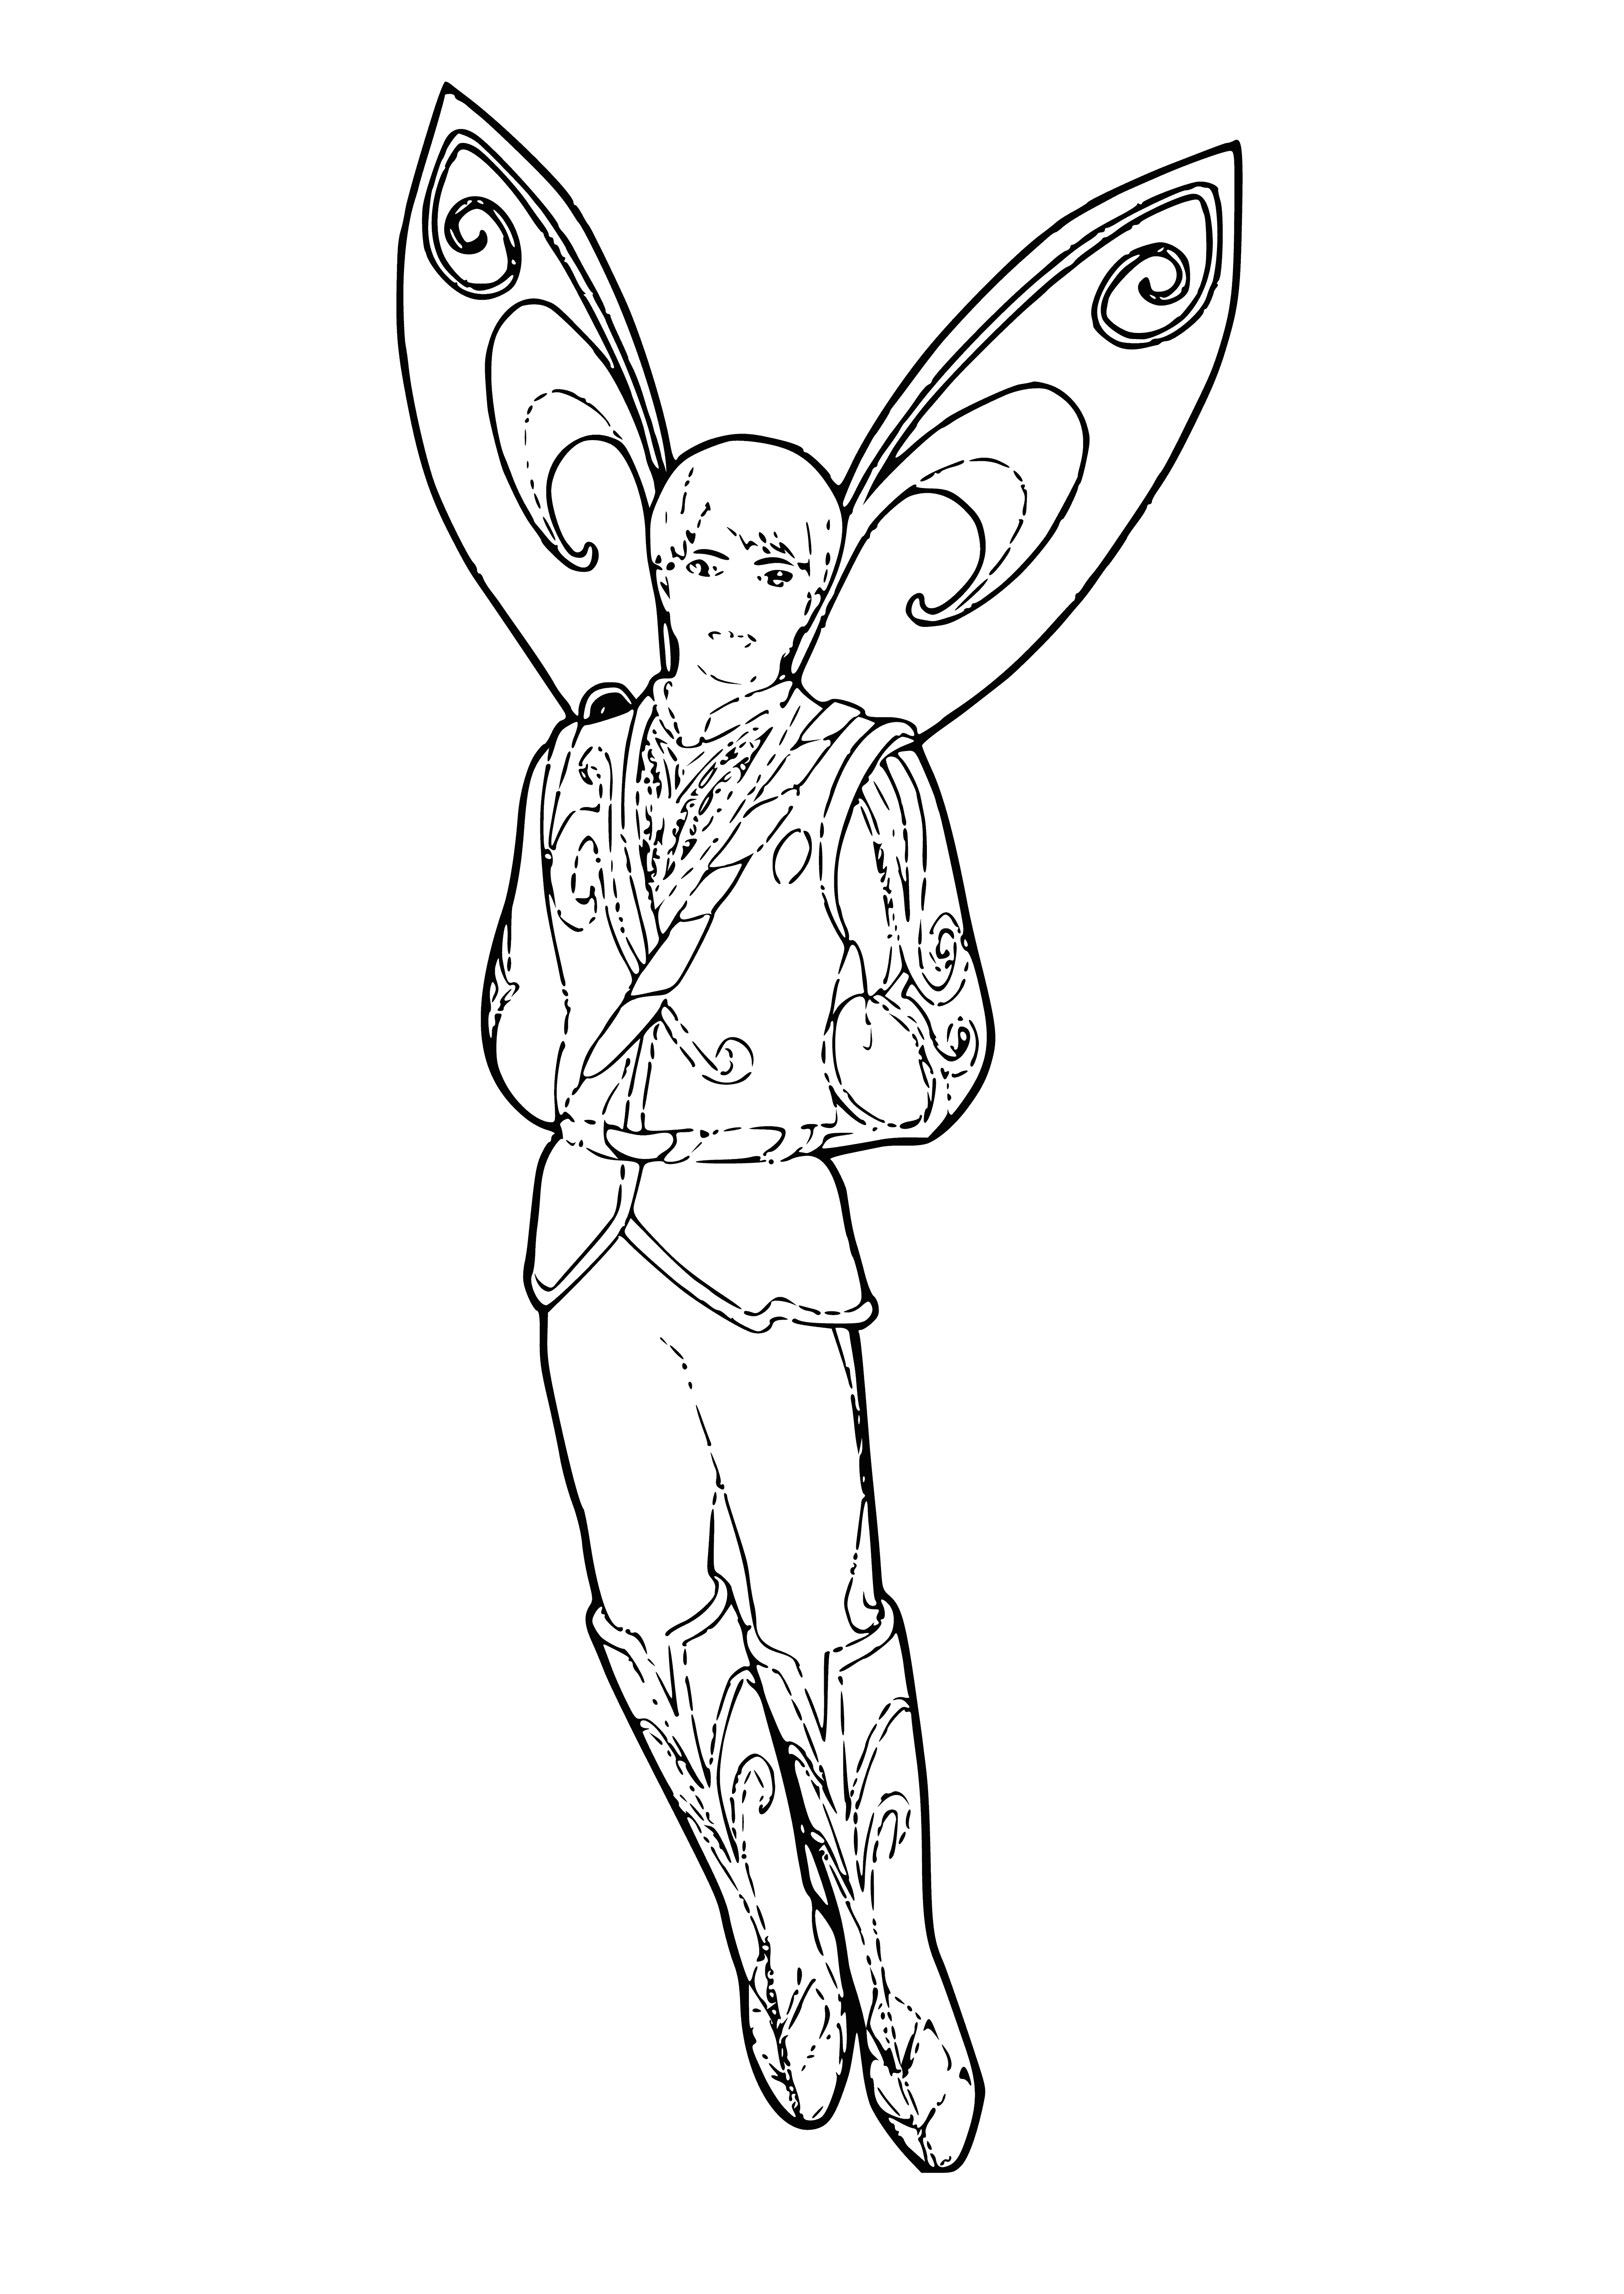 Prince of Fairyland coloring page